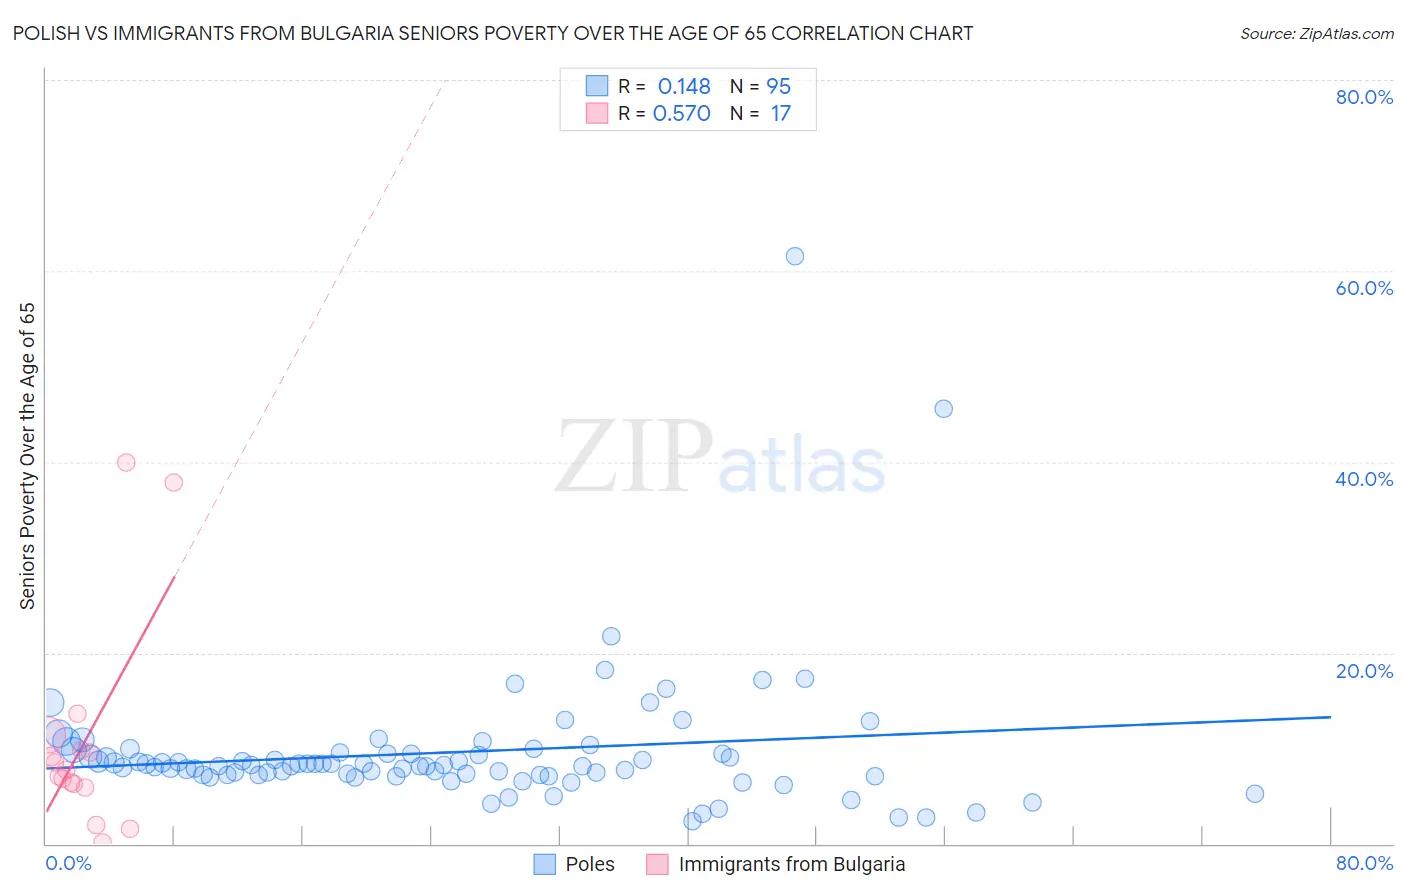 Polish vs Immigrants from Bulgaria Seniors Poverty Over the Age of 65